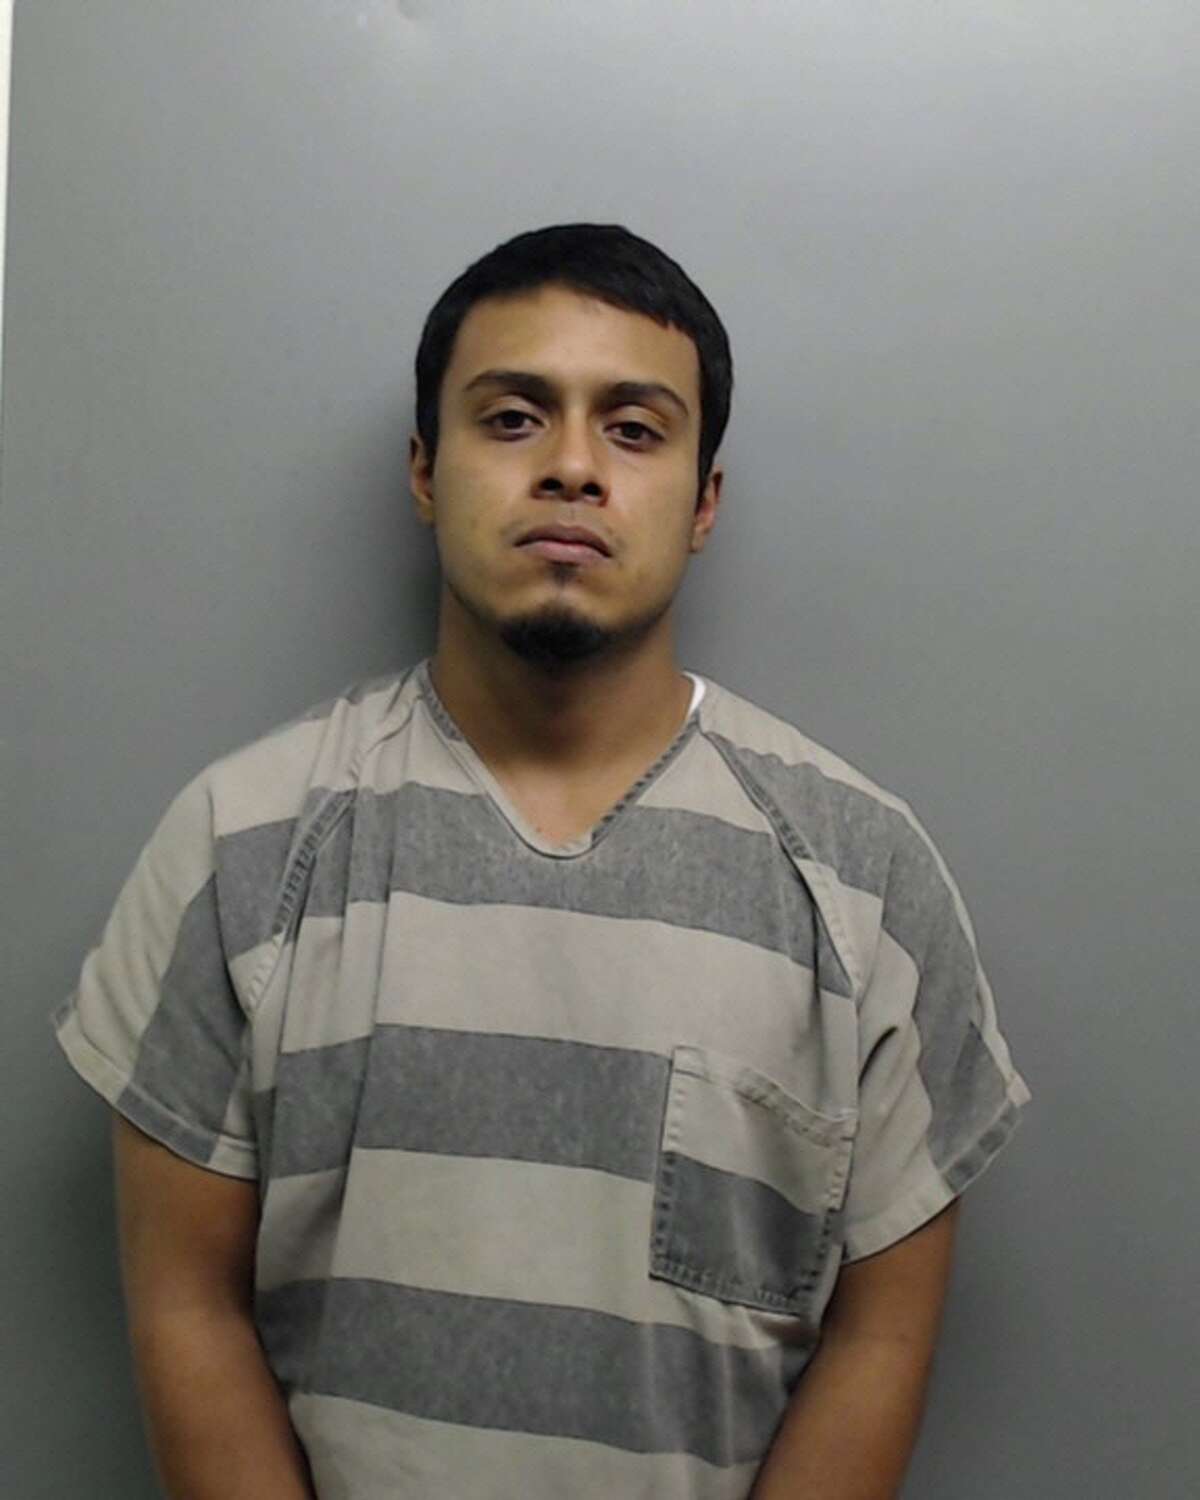 Sergio Azari Garza, 27, was charged with two counts of aggravated sexual assault of a child on Tuesday.